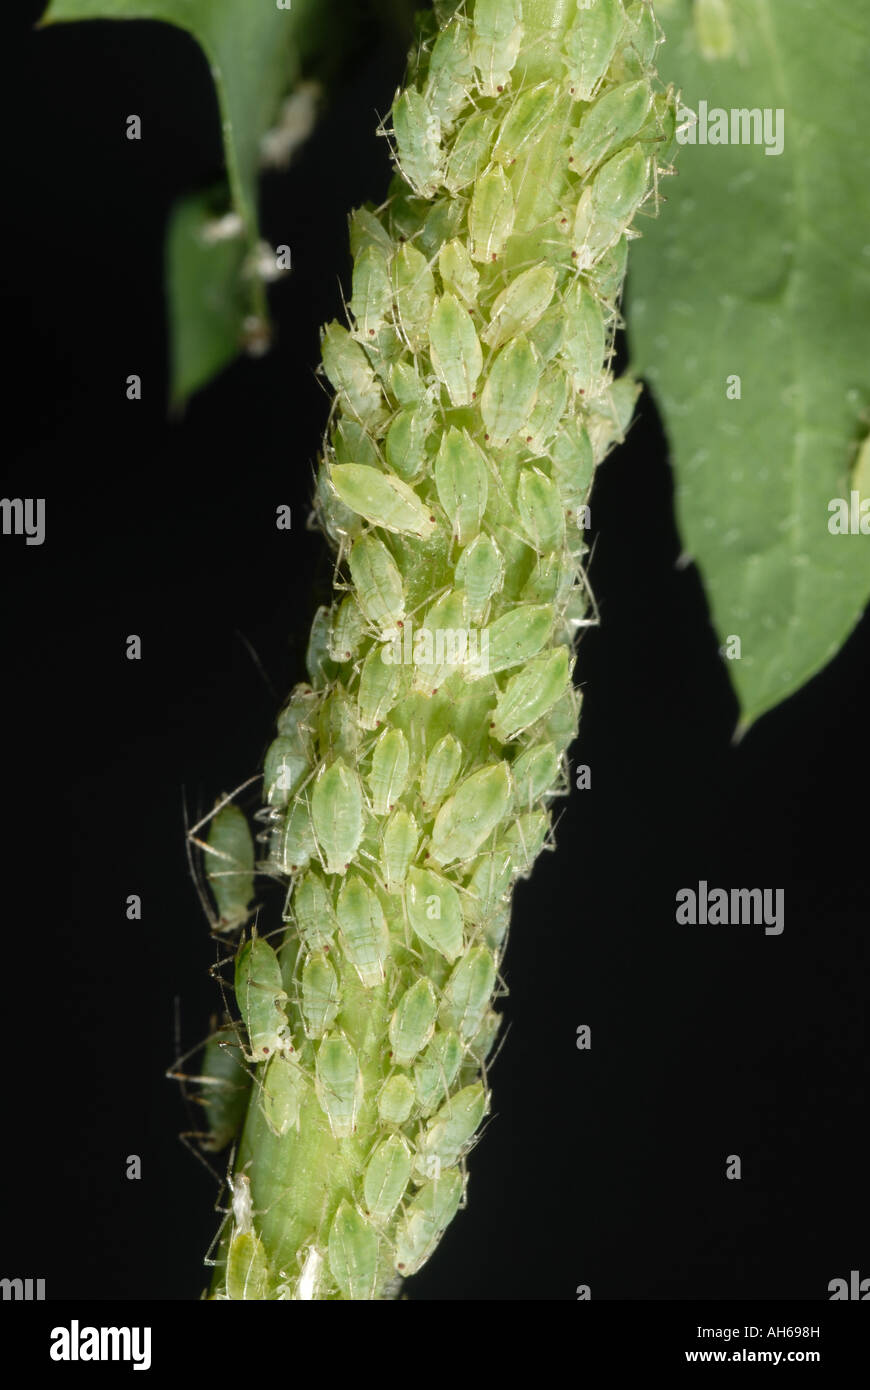 Currant sowthistle aphid Hyperomyzus lactucae infestation on sowthistle stem Stock Photo